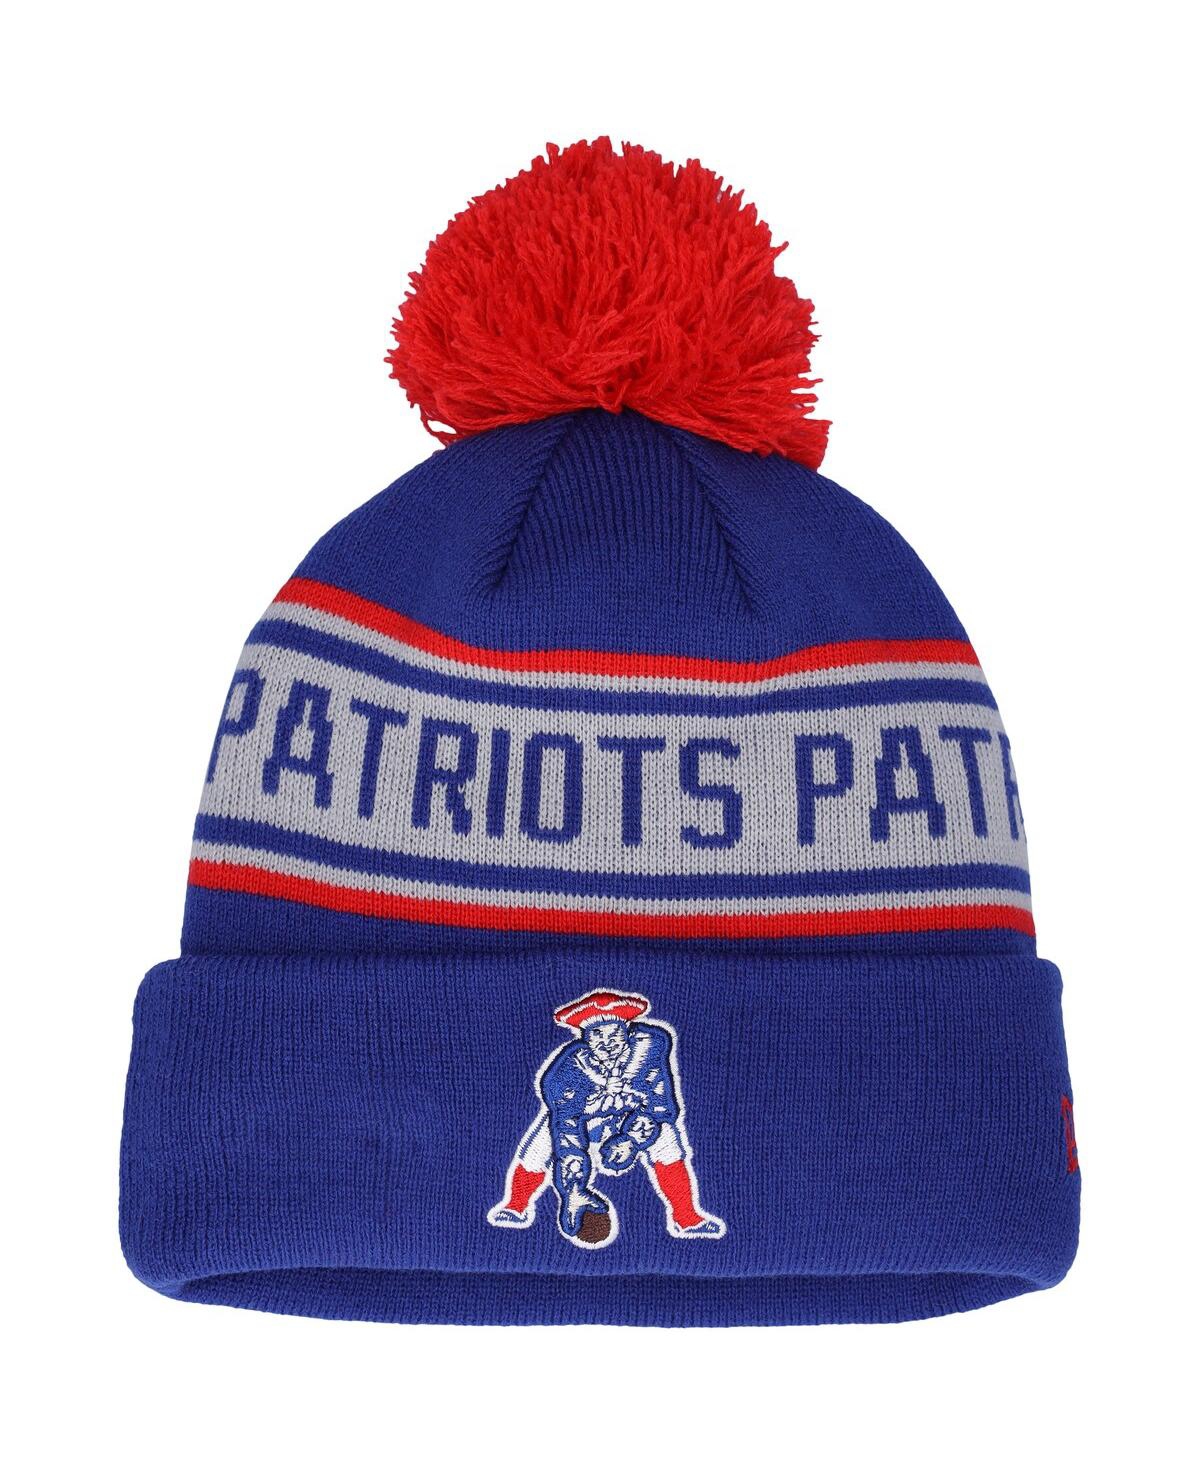 New Era Kids' Big Boys And Girls  Navy New England Patriots Repeat Cuffed Knit Hat With Pom